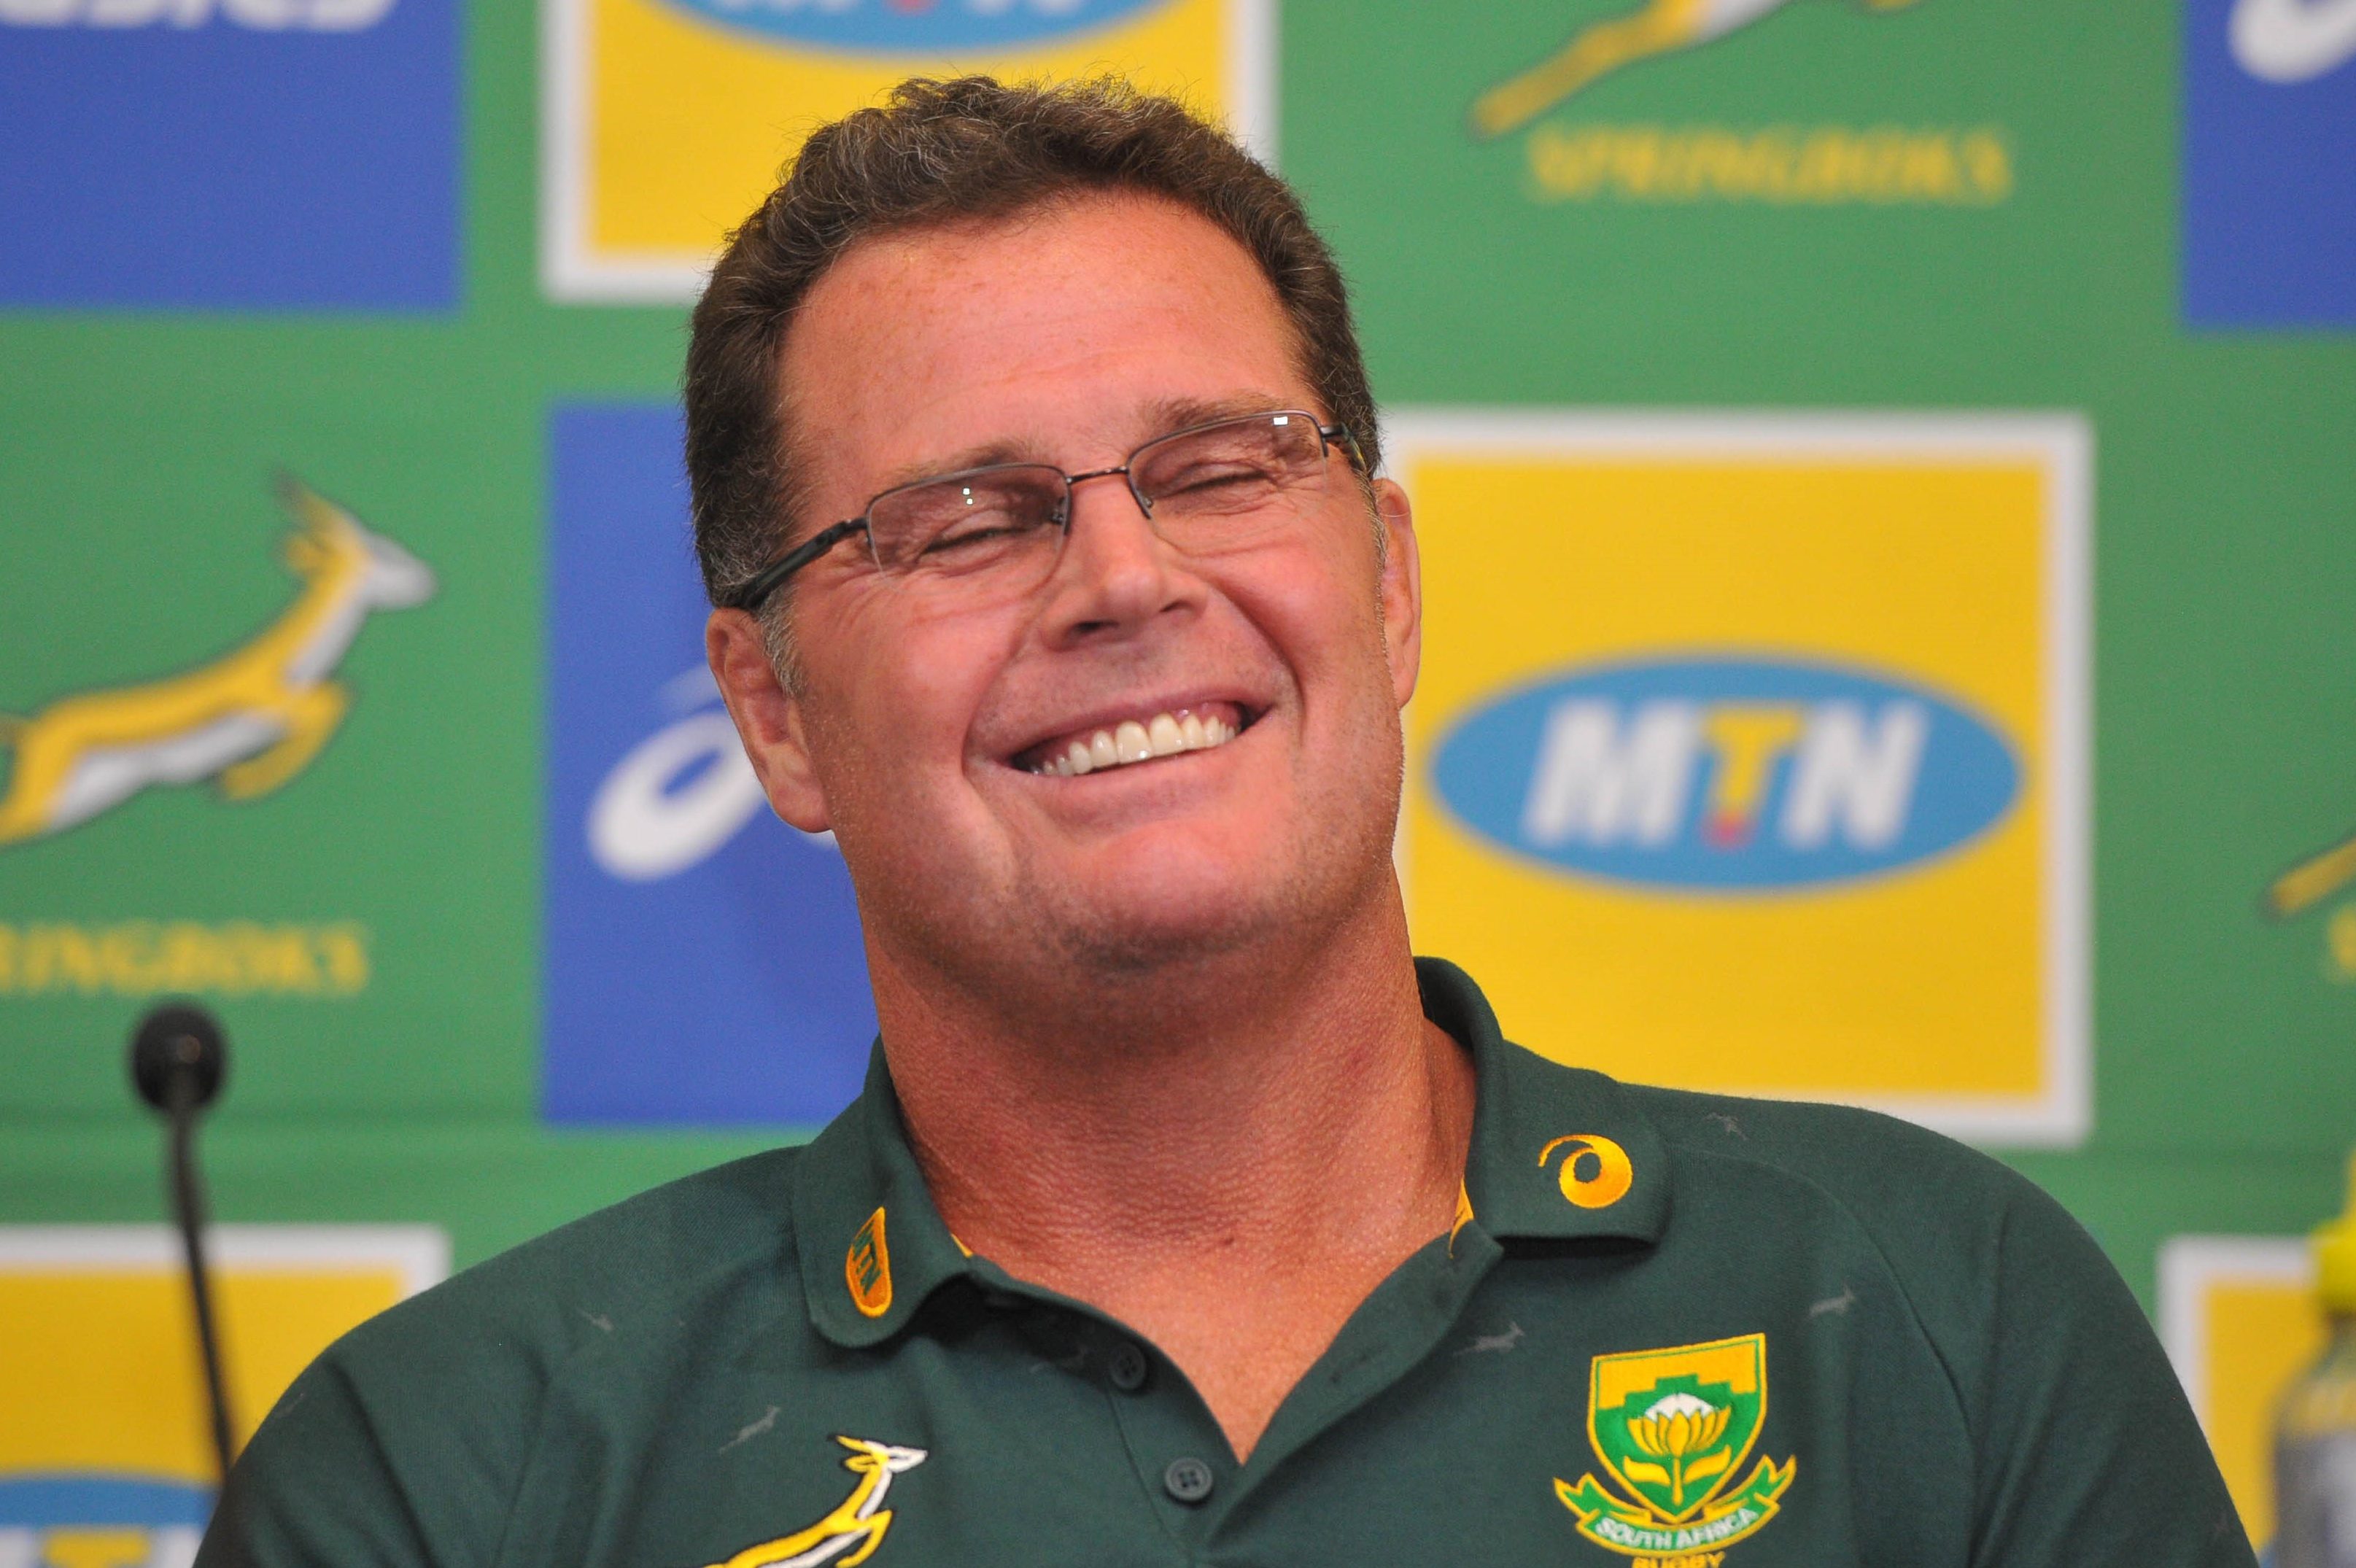 Rassie Erasmus during the Springboks Press Conference on 24 January 2020 at Southern Sun Hotel, Pretoria , Pic Sydney Mahlangu/BackpagePix